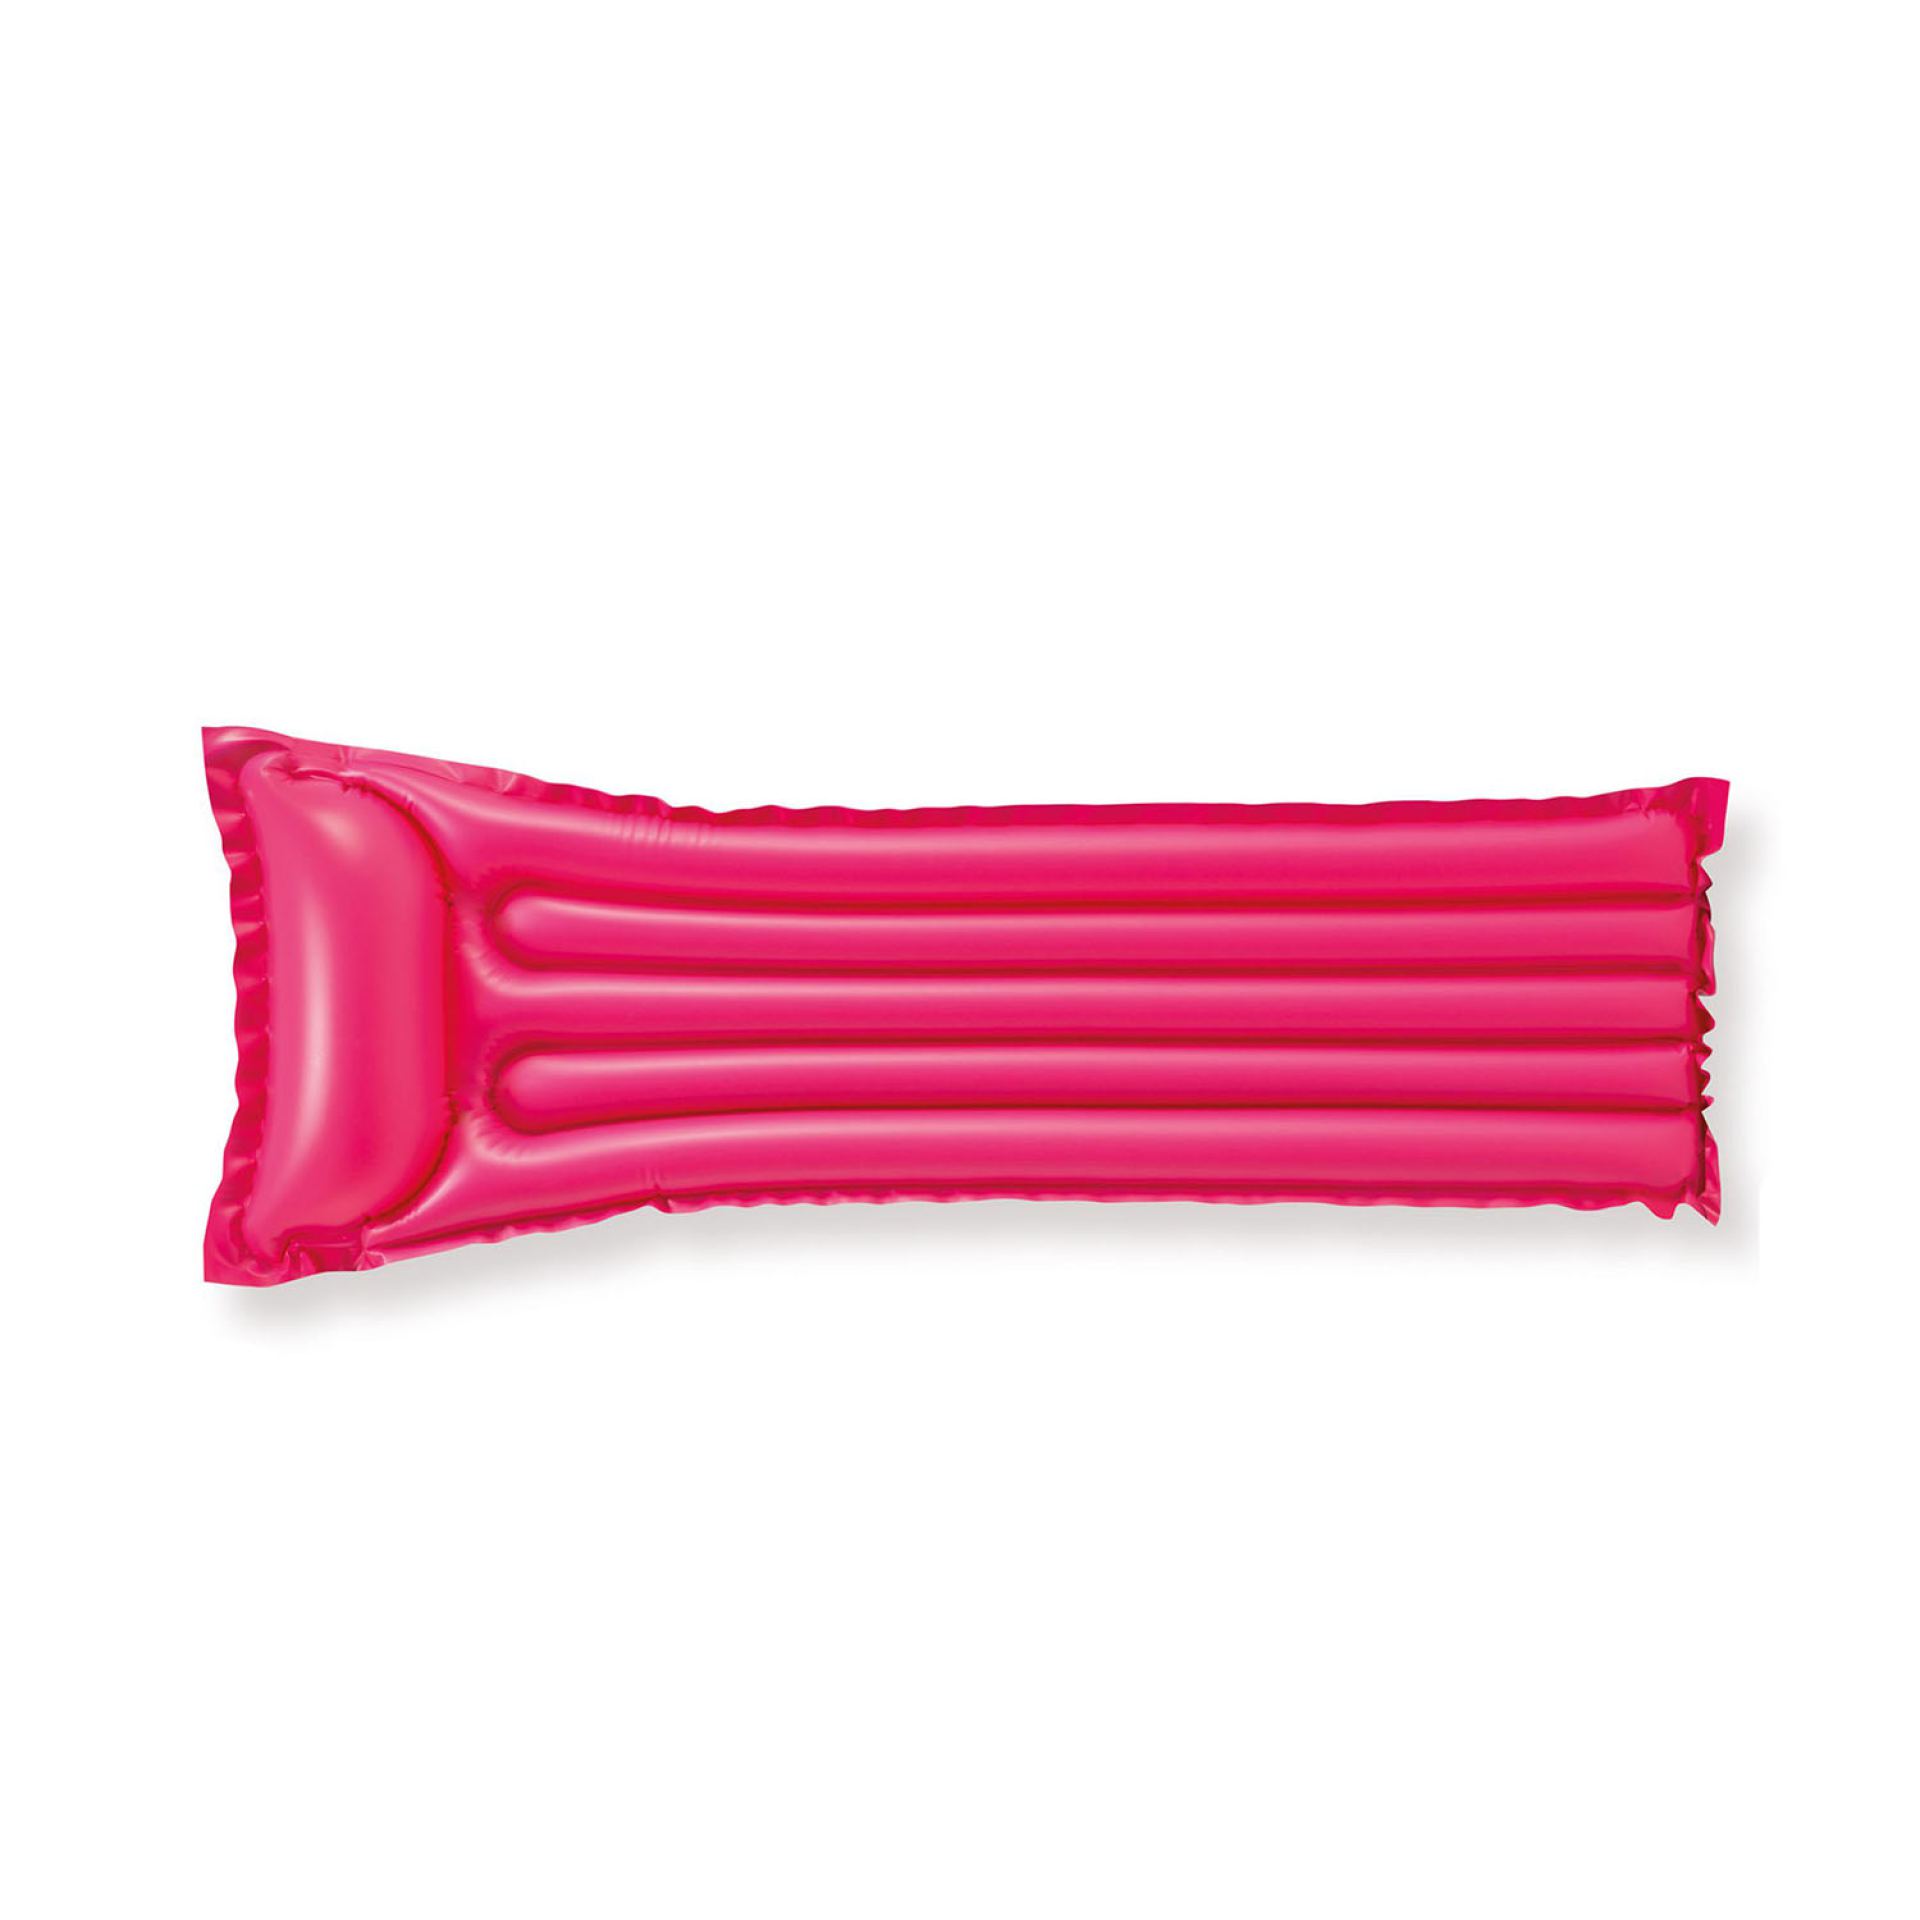 Intex luchtbed roze